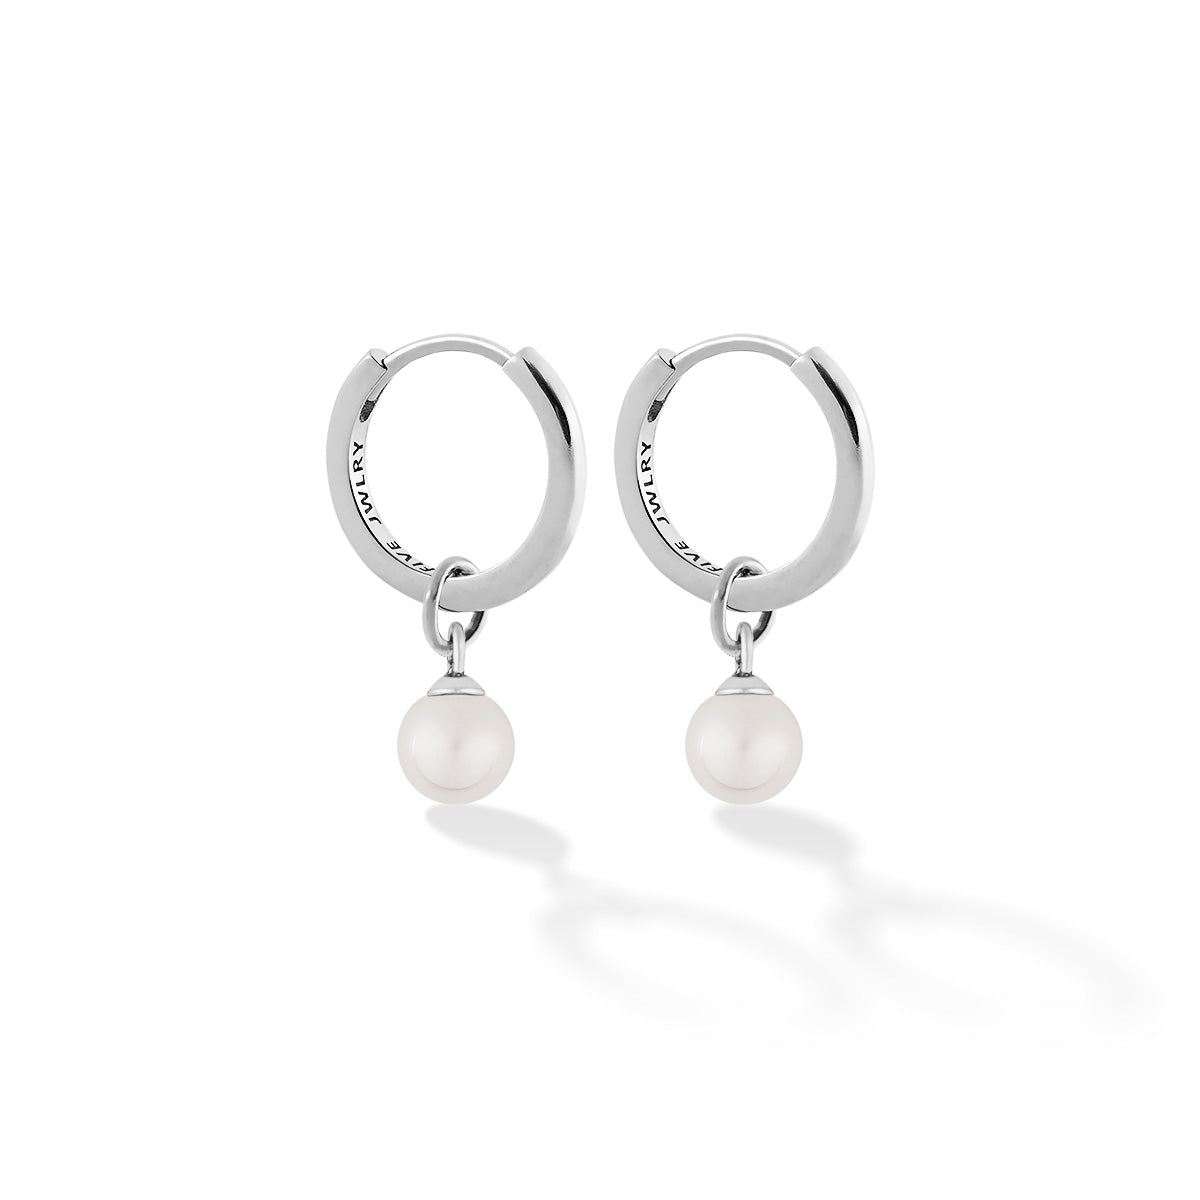 SOCA women's earring by Five Jwlry. A sleek 16mm hoop earring featuring a charm made from a small white pearl. Available in 14k gold or silver, crafted from water-resistant 316L stainless steel. Hypoallergenic with a 2-year warranty.